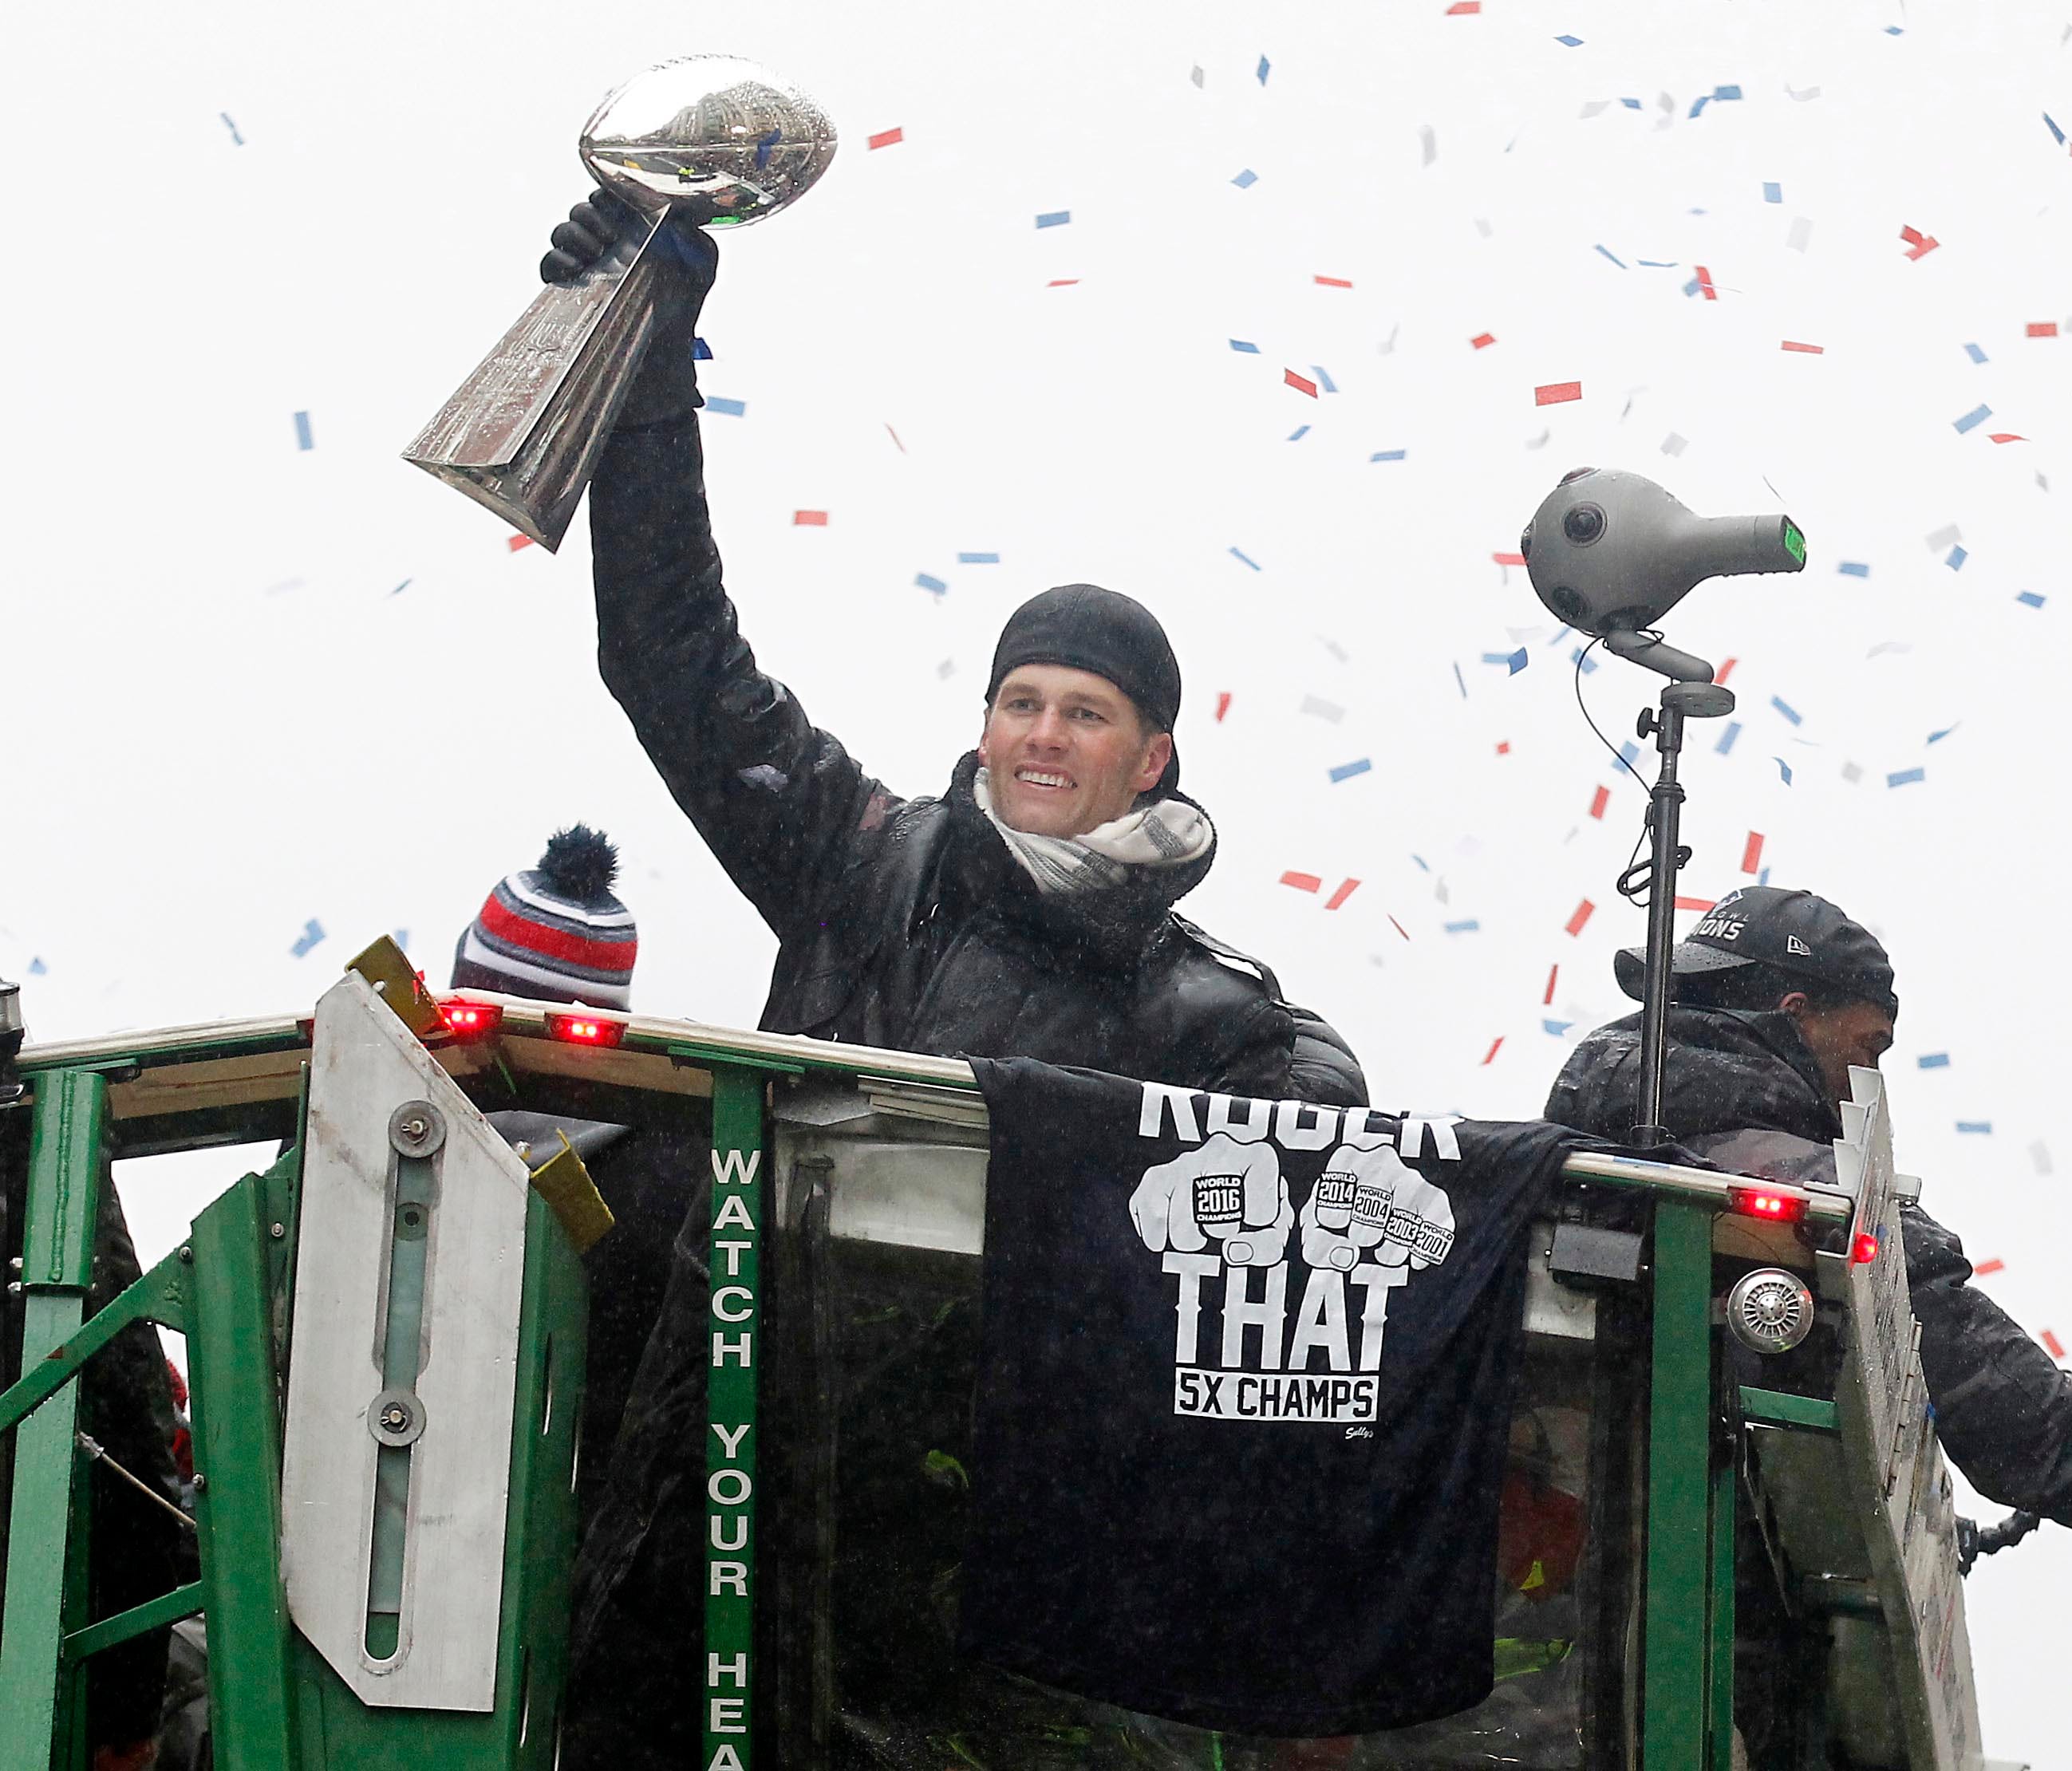 New England Patriots quarterback Tom Brady hoists the Lombardi Trophy as he rides a duck boat during the Super Bowl LI parade.